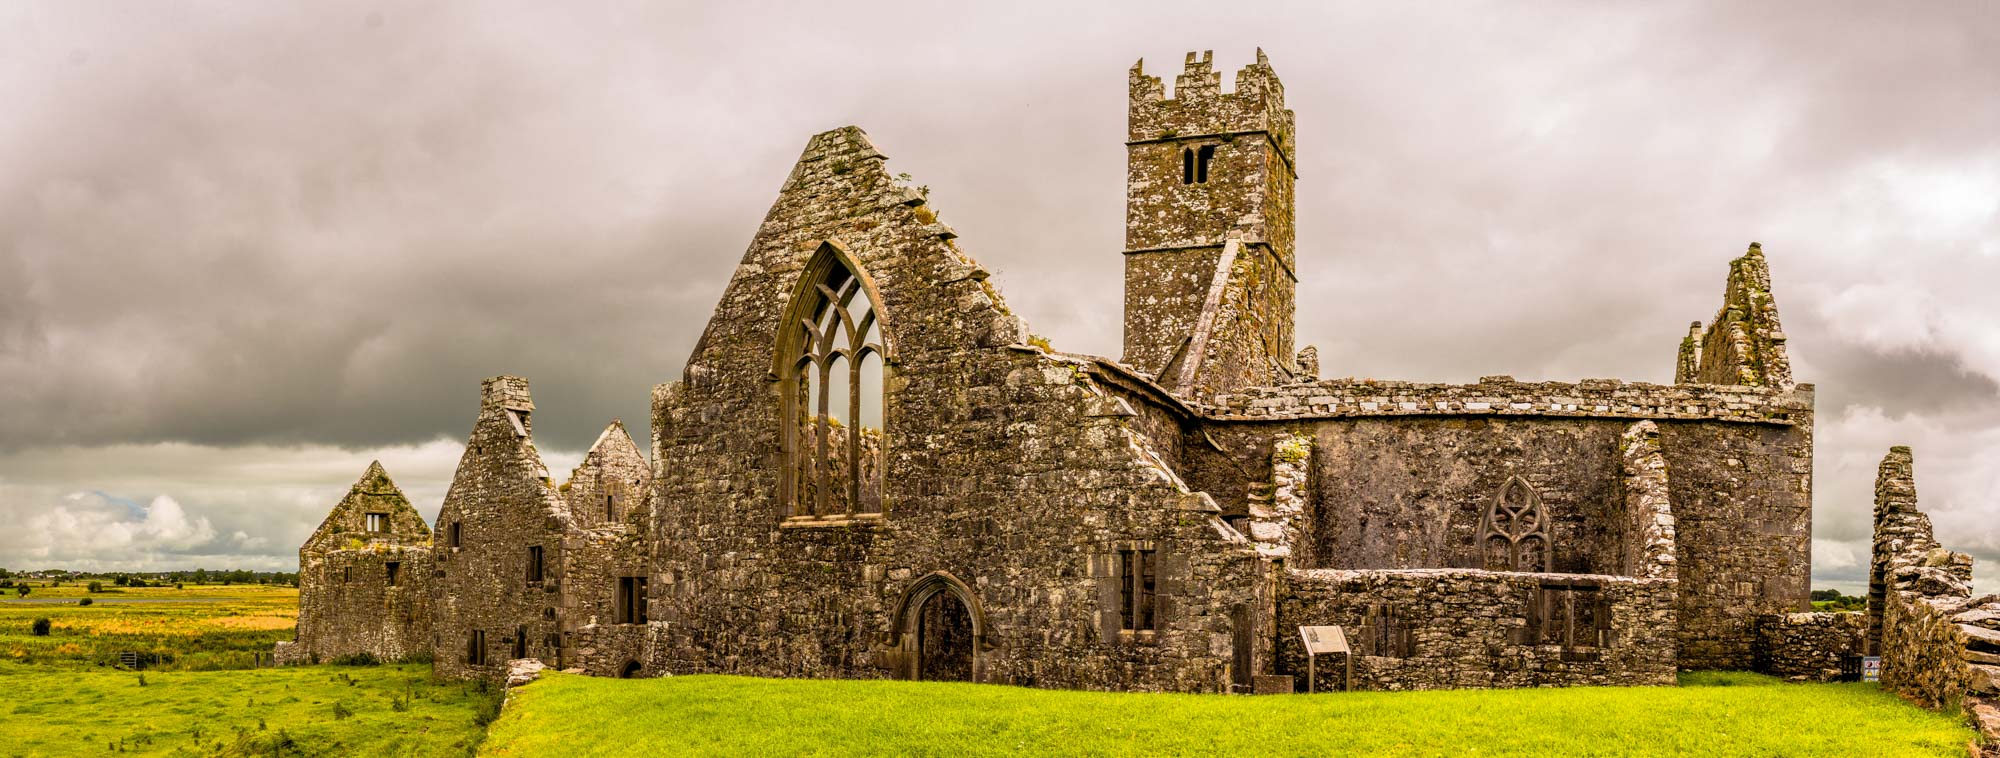 Landscapes Of Ireland. Ruins Of Ross Errilly Friary Convent In G